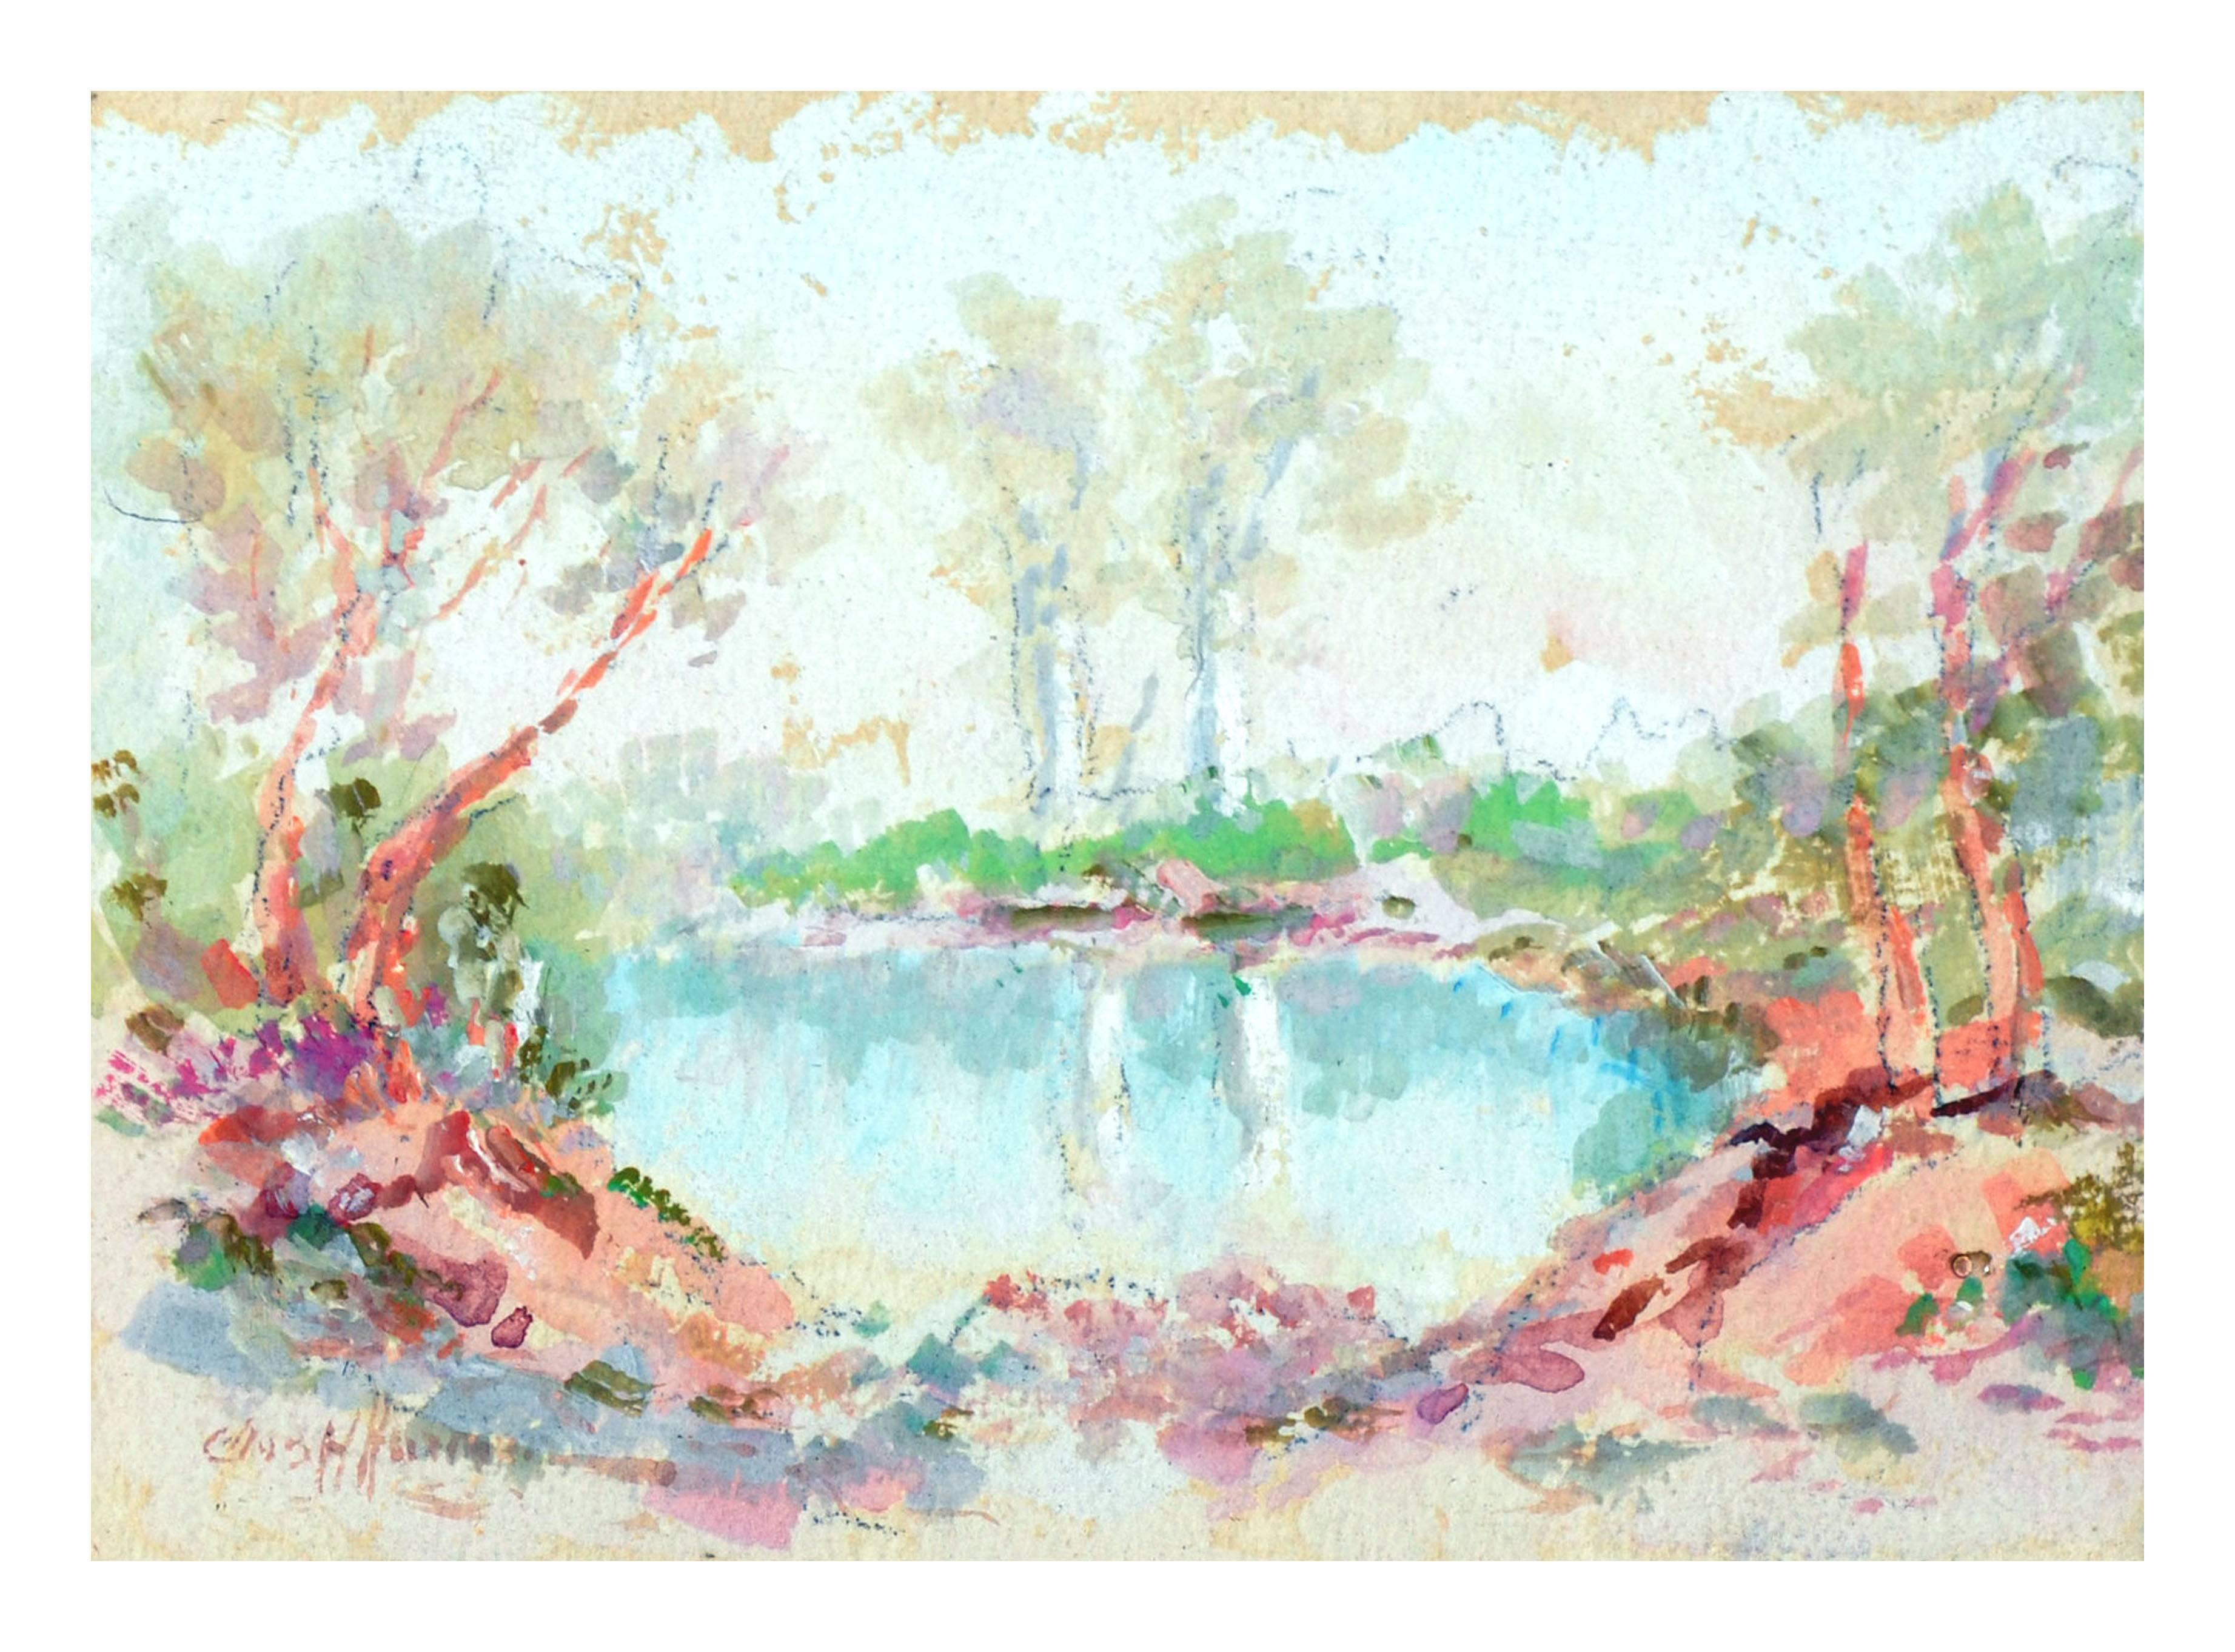 Early 20th Century Fauvist Abstracted Landscape - Art by Charles Henry Harmon 